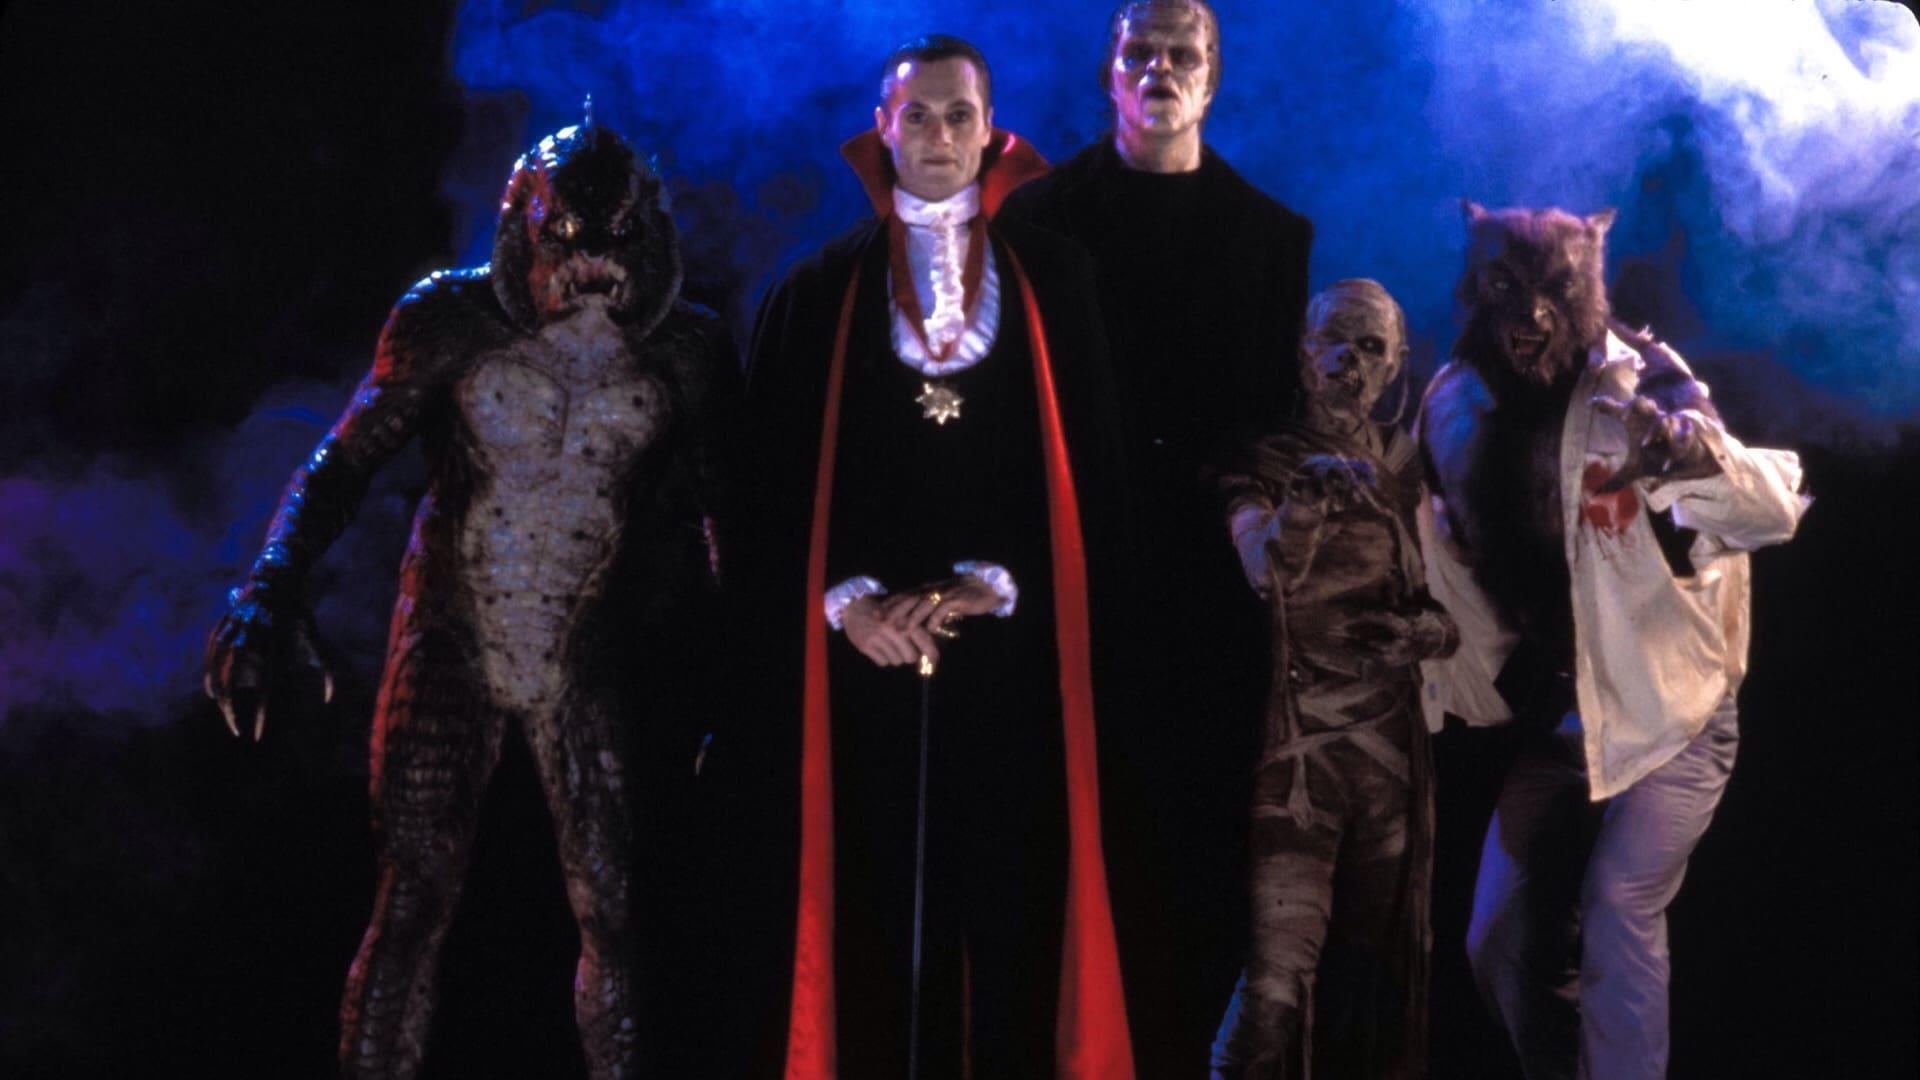 monster squad movie review